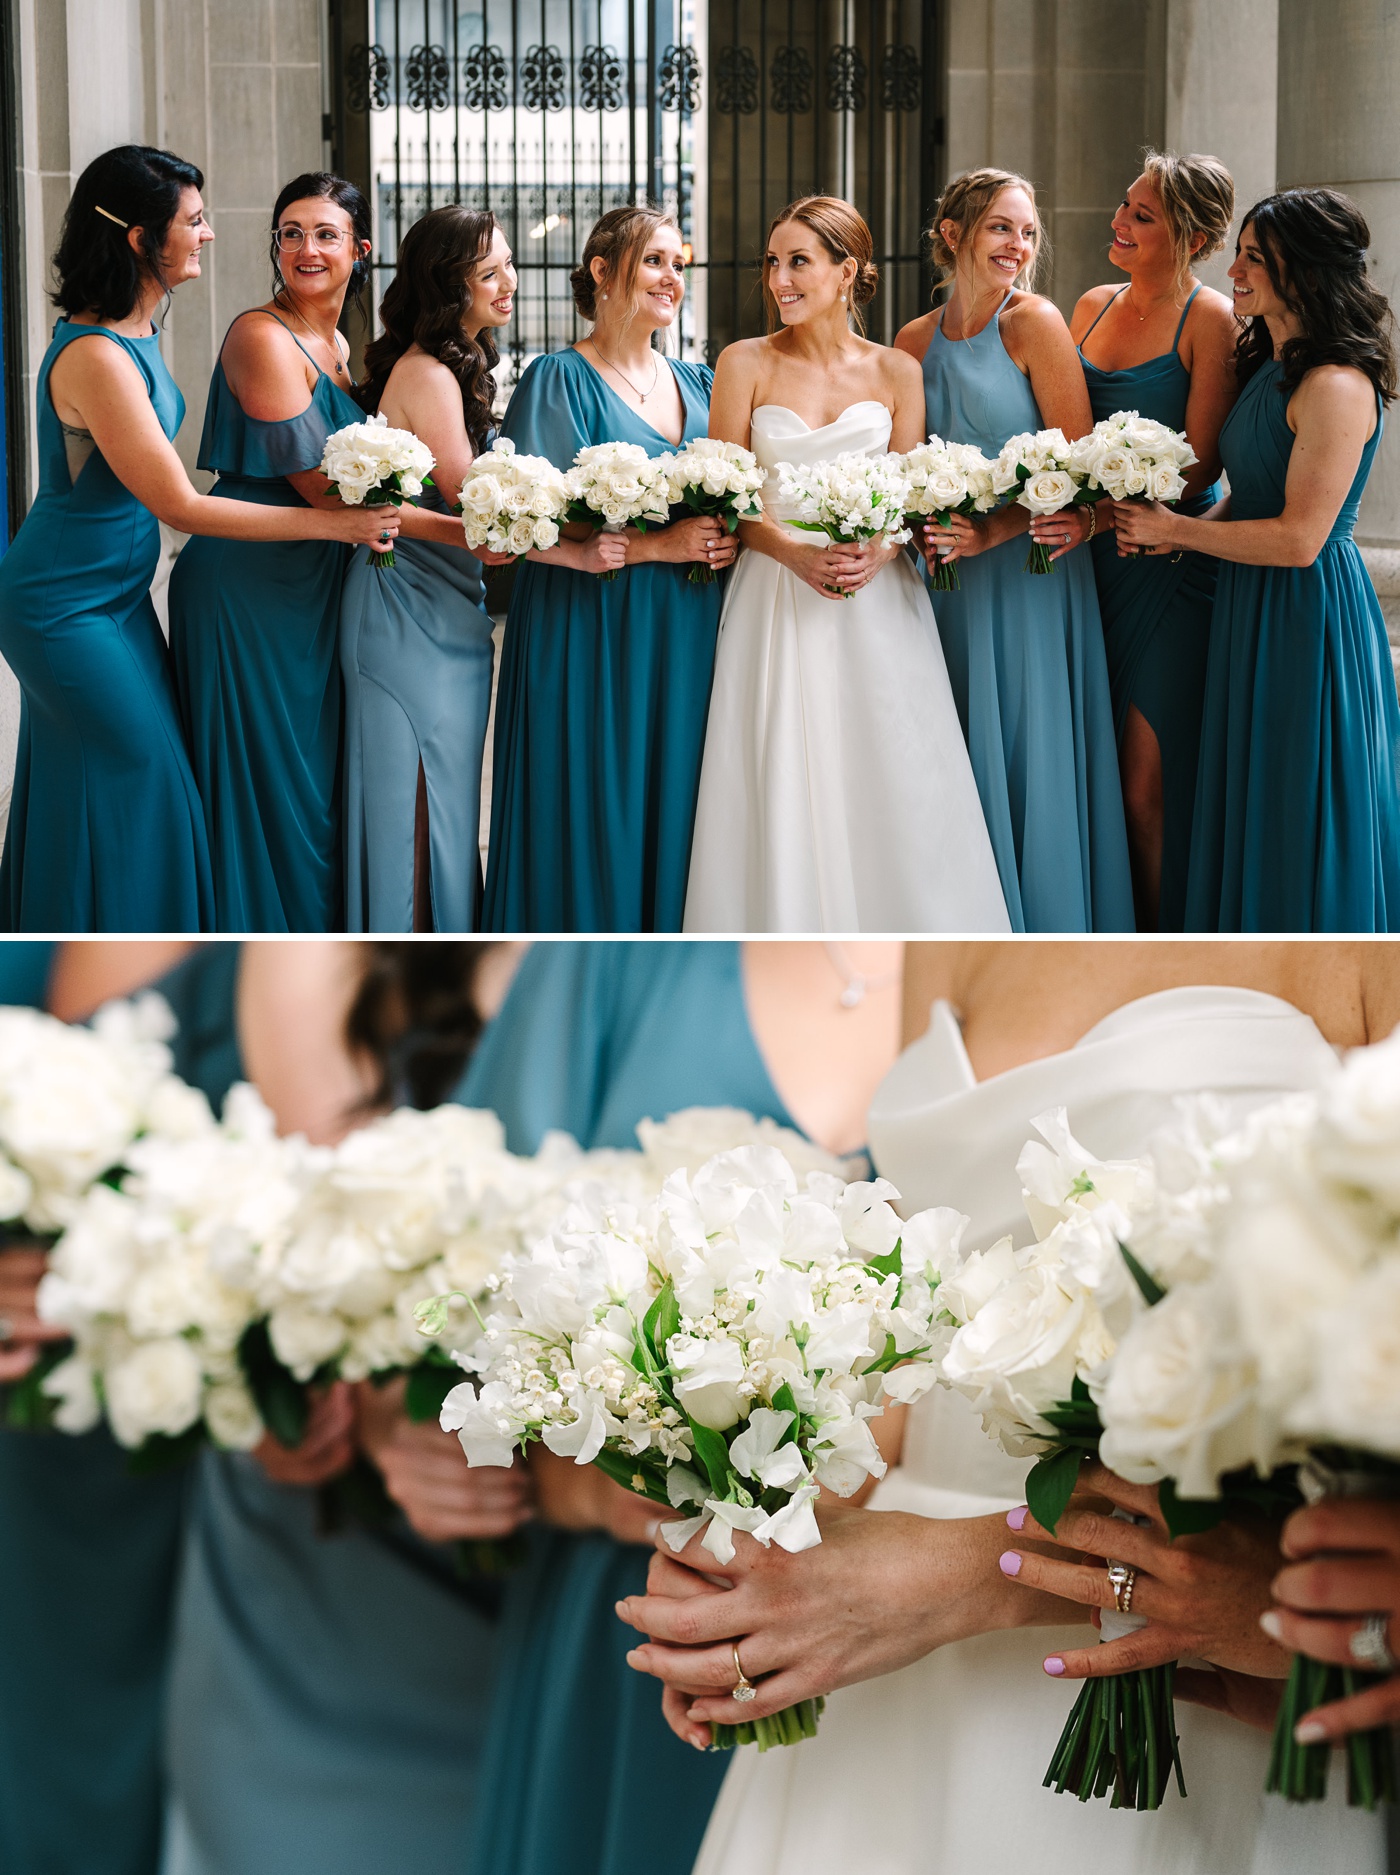 Bride and her bridesmaids holding white wedding bouquets filled with roses and lisianthus